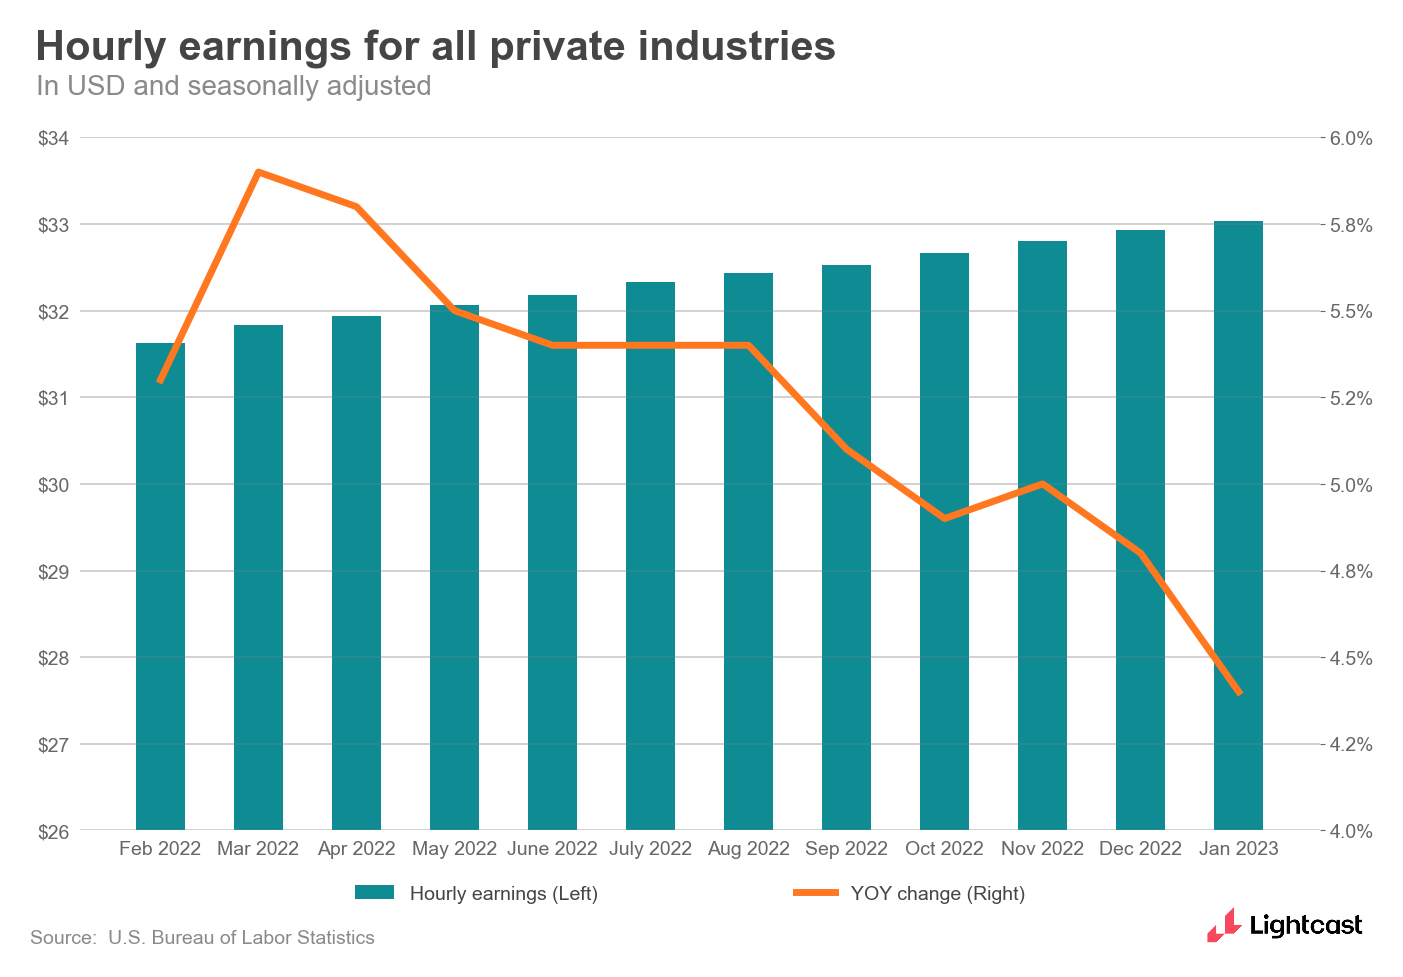 Hourly earnings for all private industries, showing a  steady increase but declining rate of change